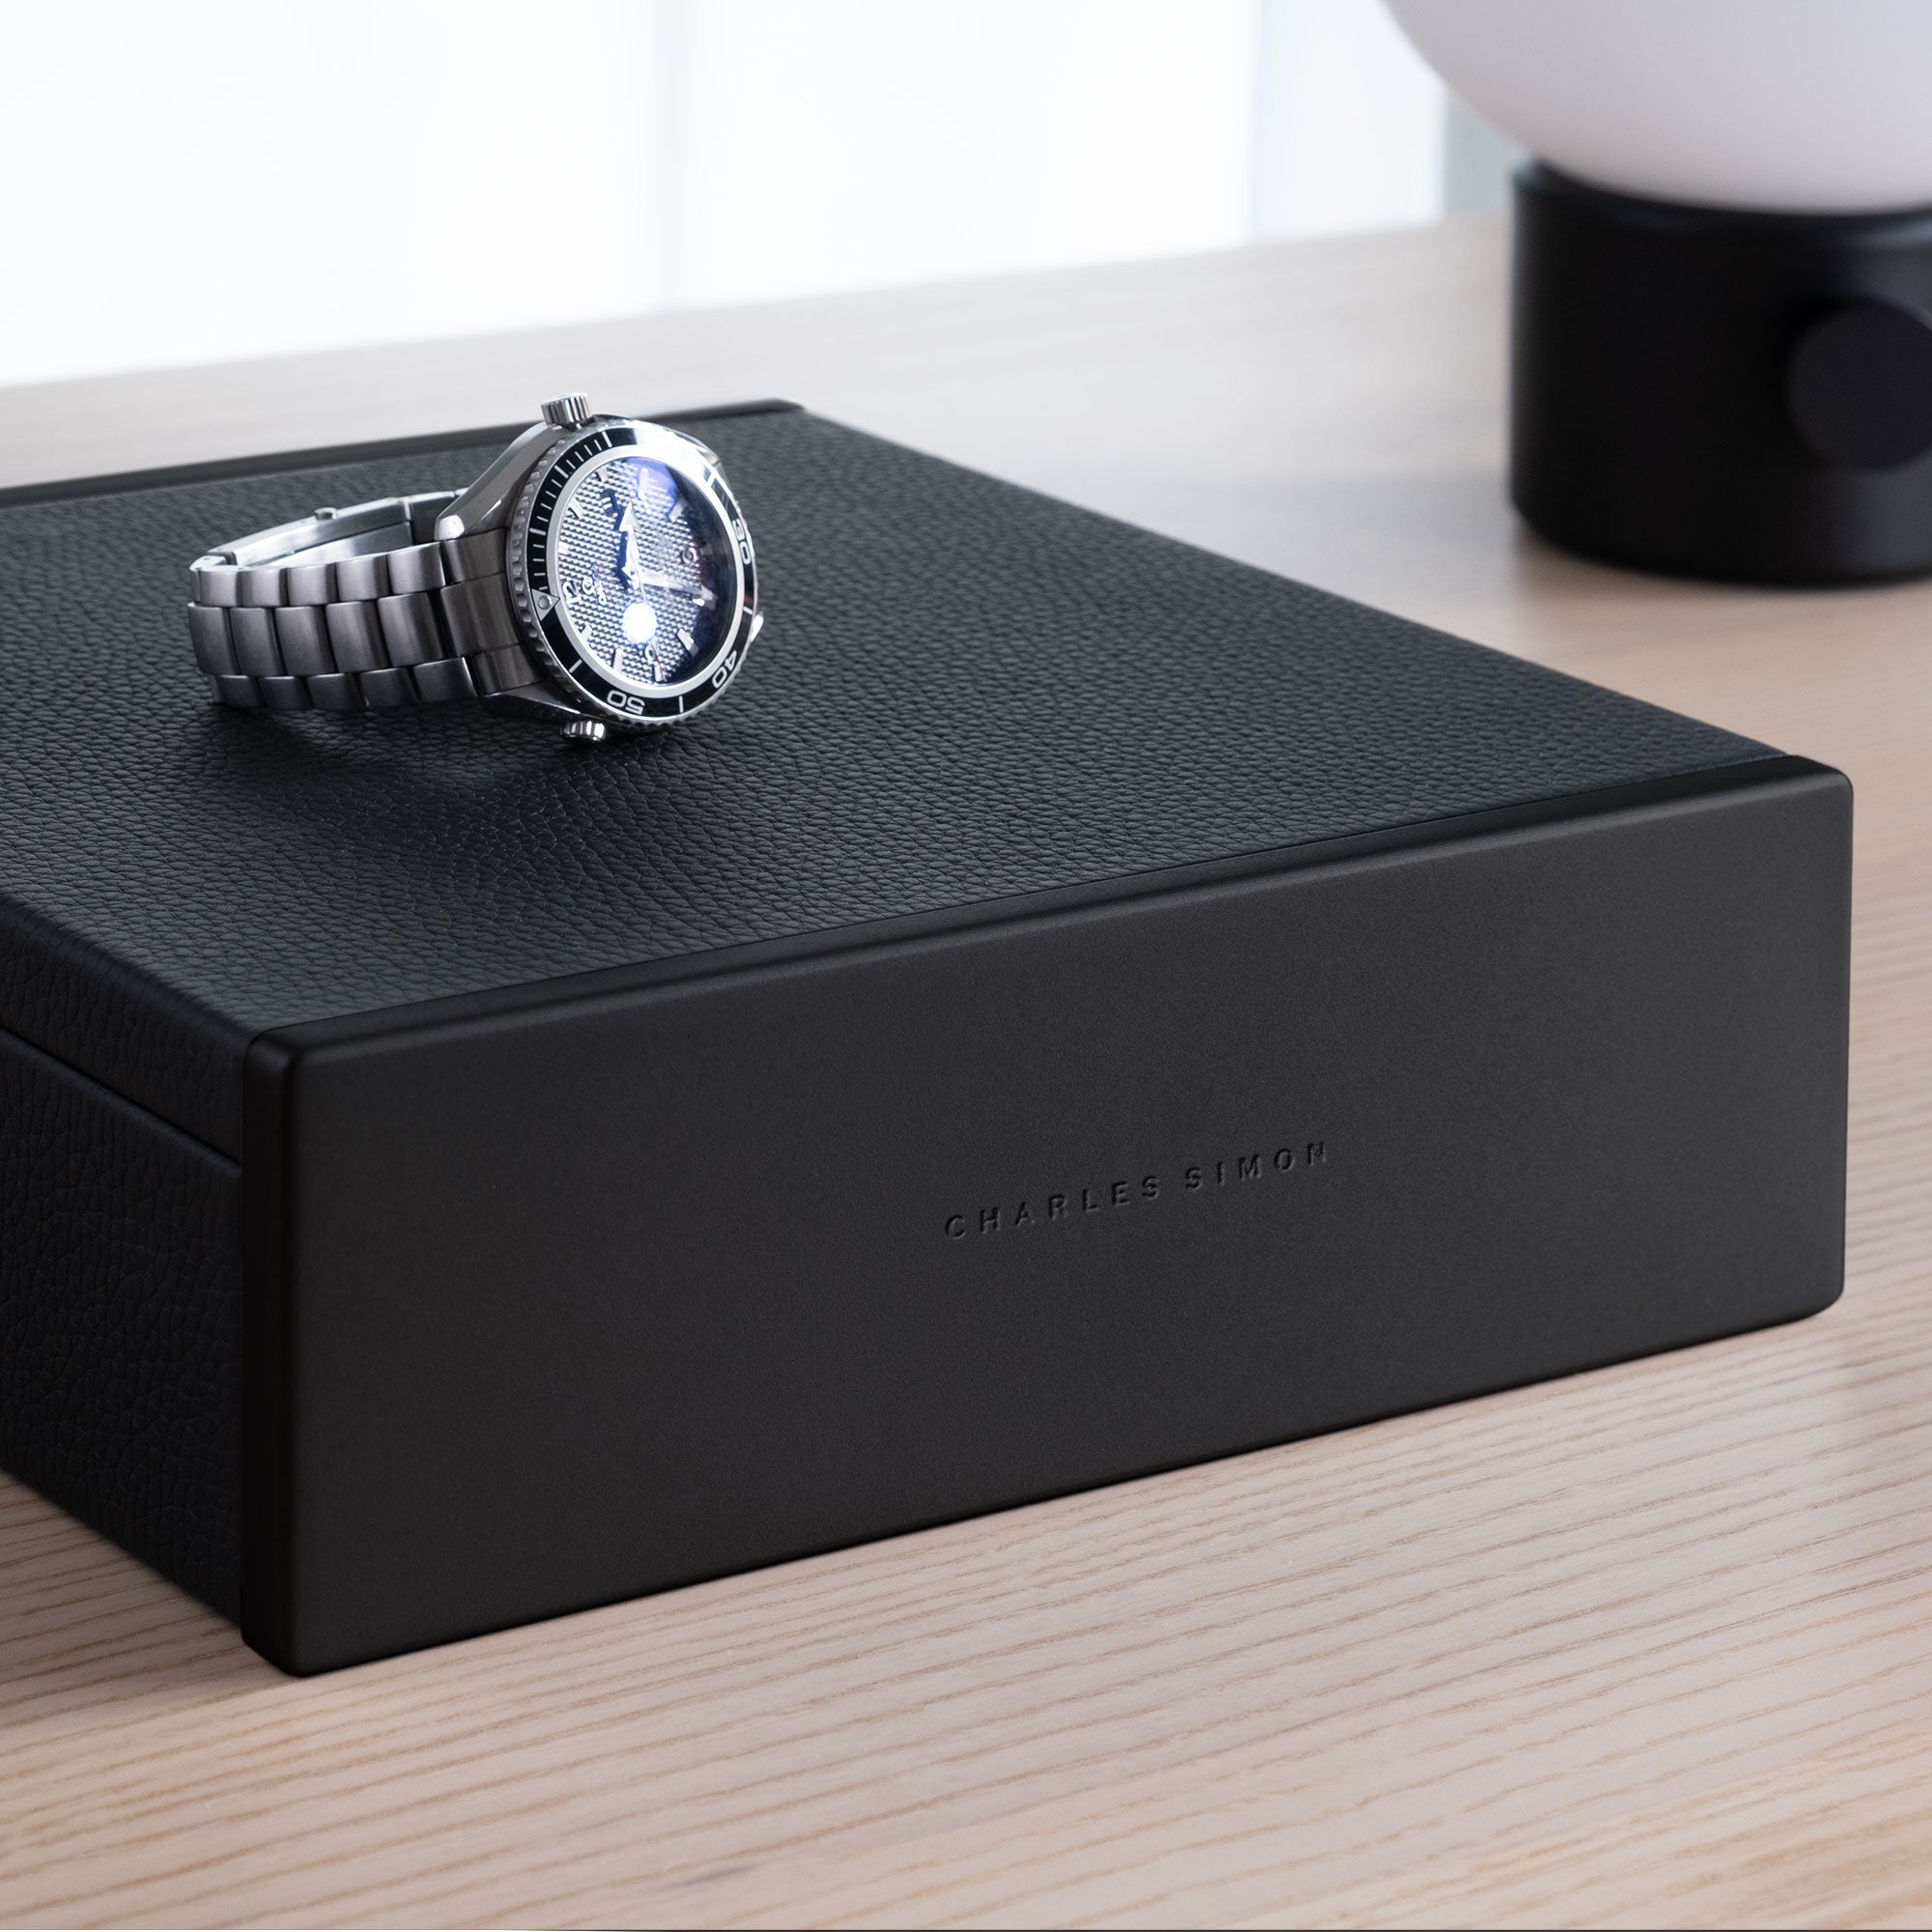 Luxury men's watch placed on top of all black Spence watch box in modern apartment